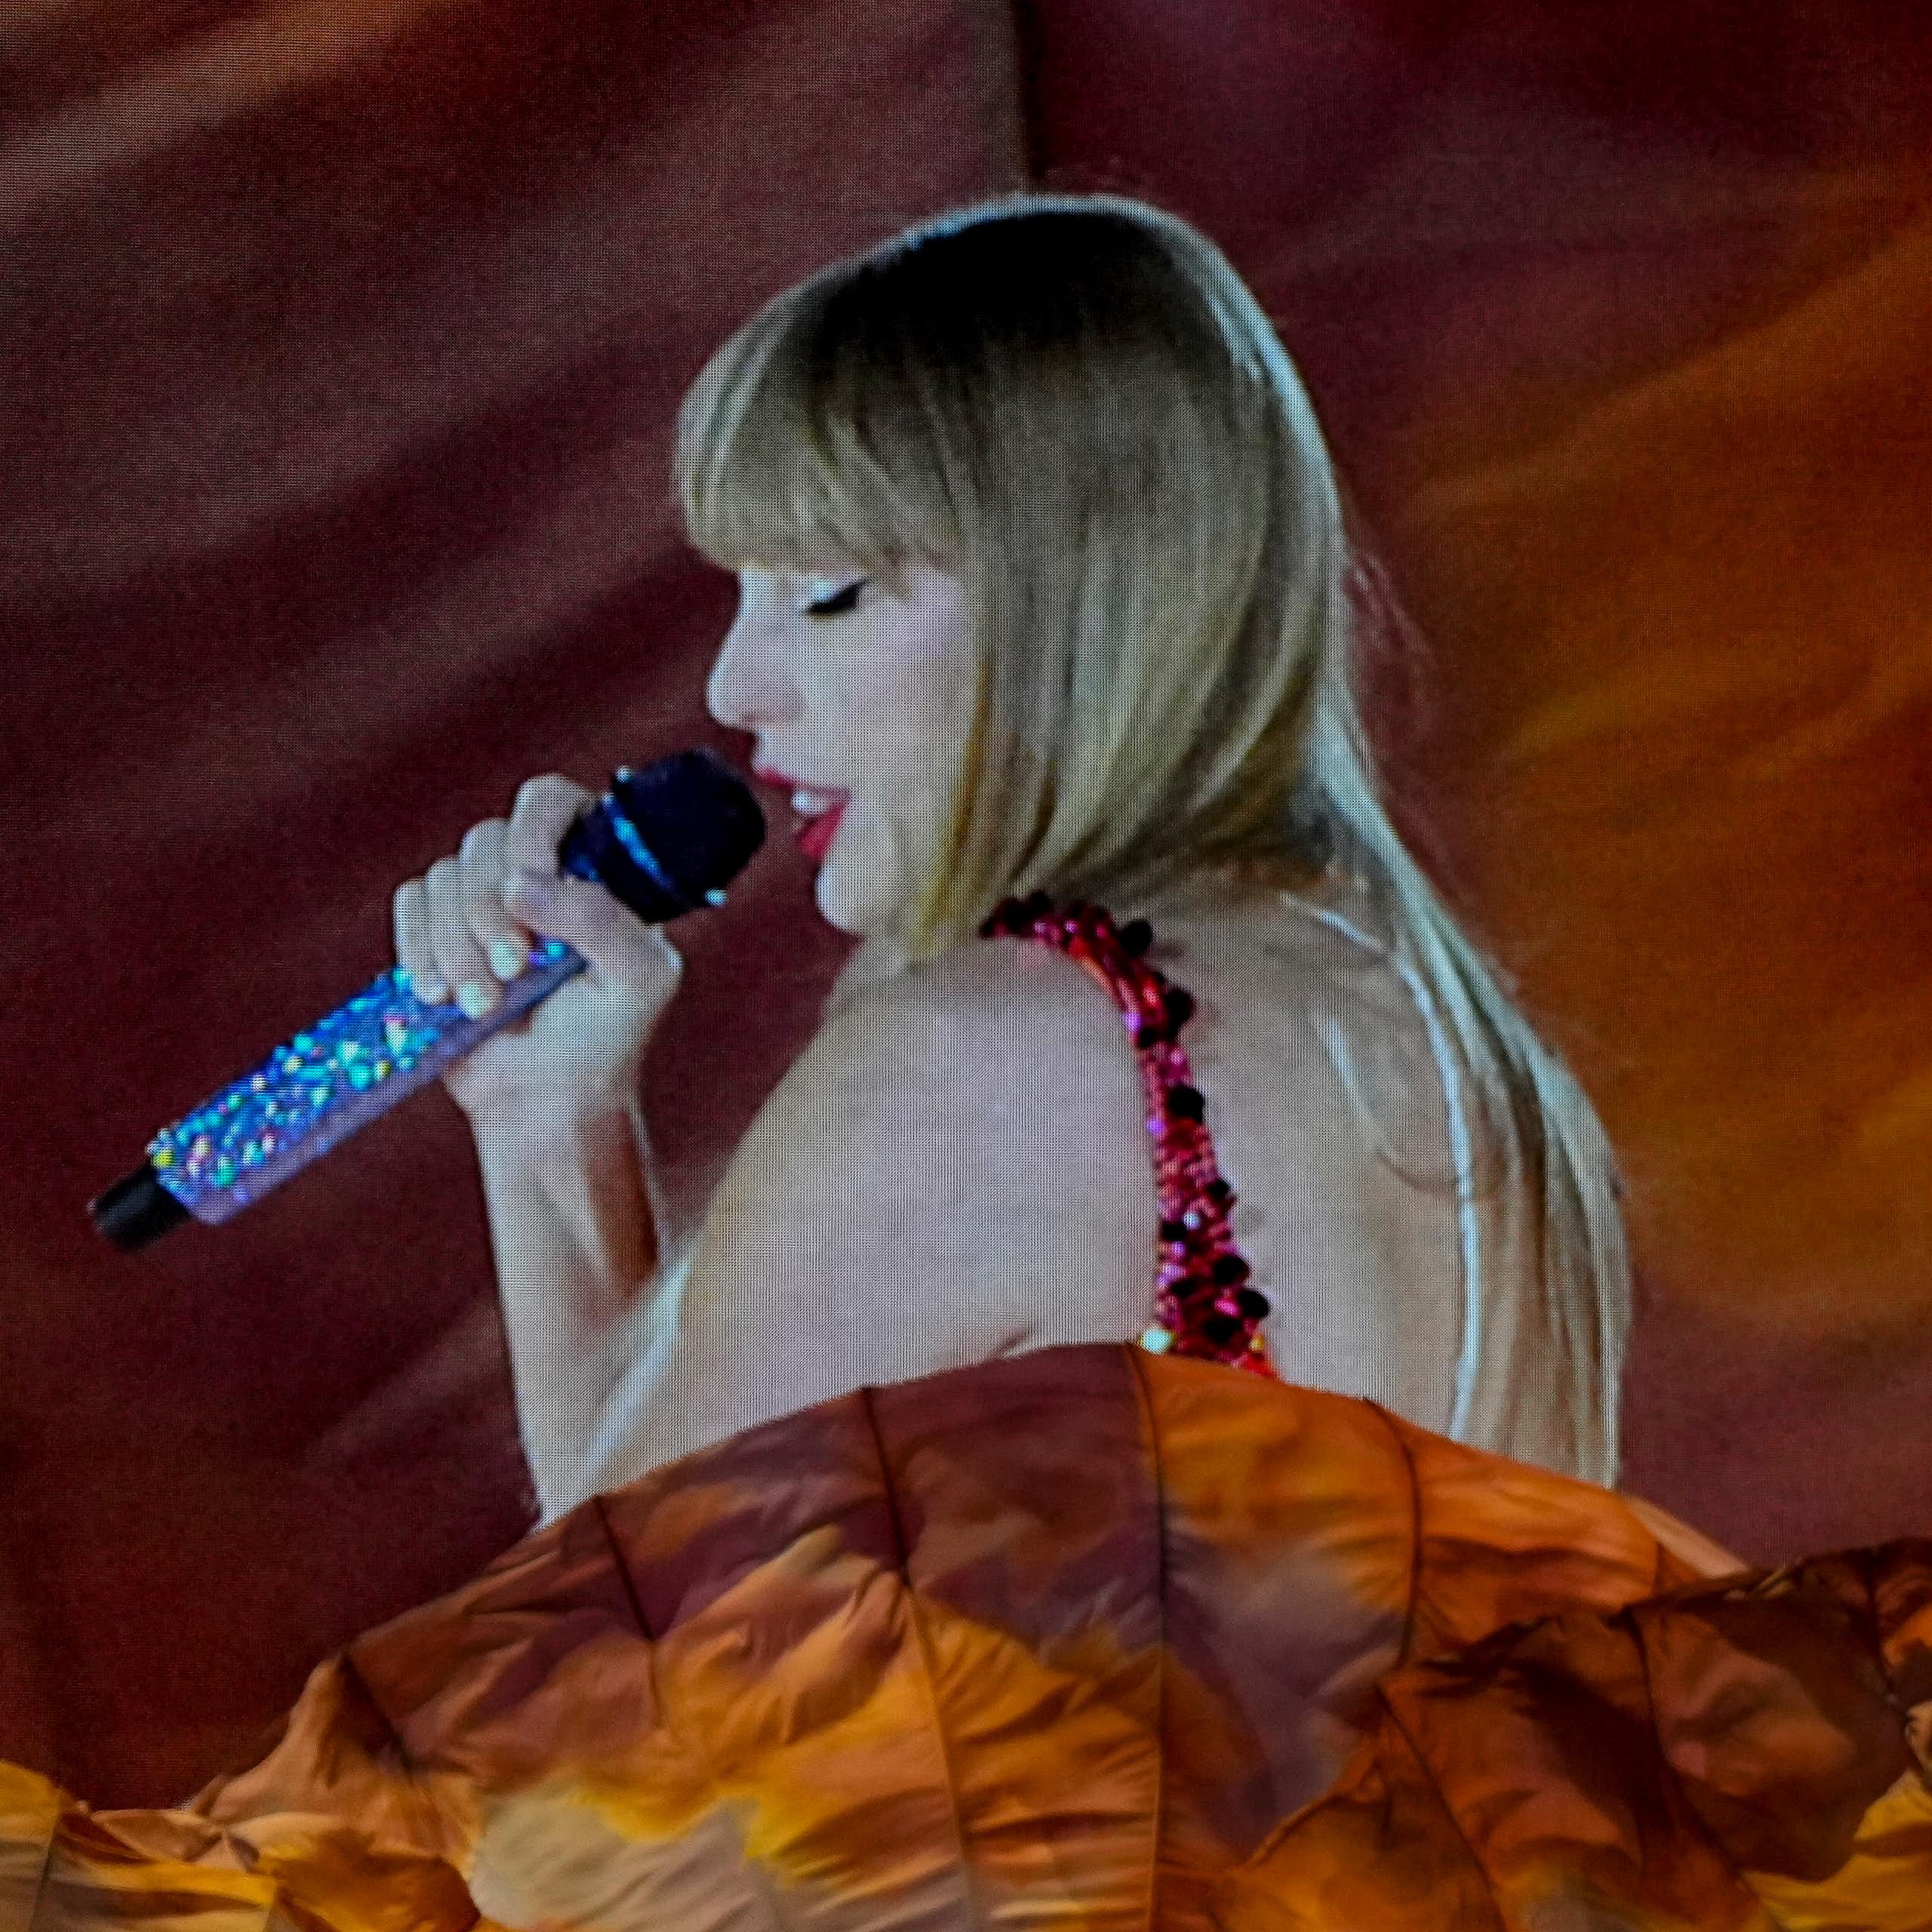 A woman performing next to a huge videoscreen projection of herself.